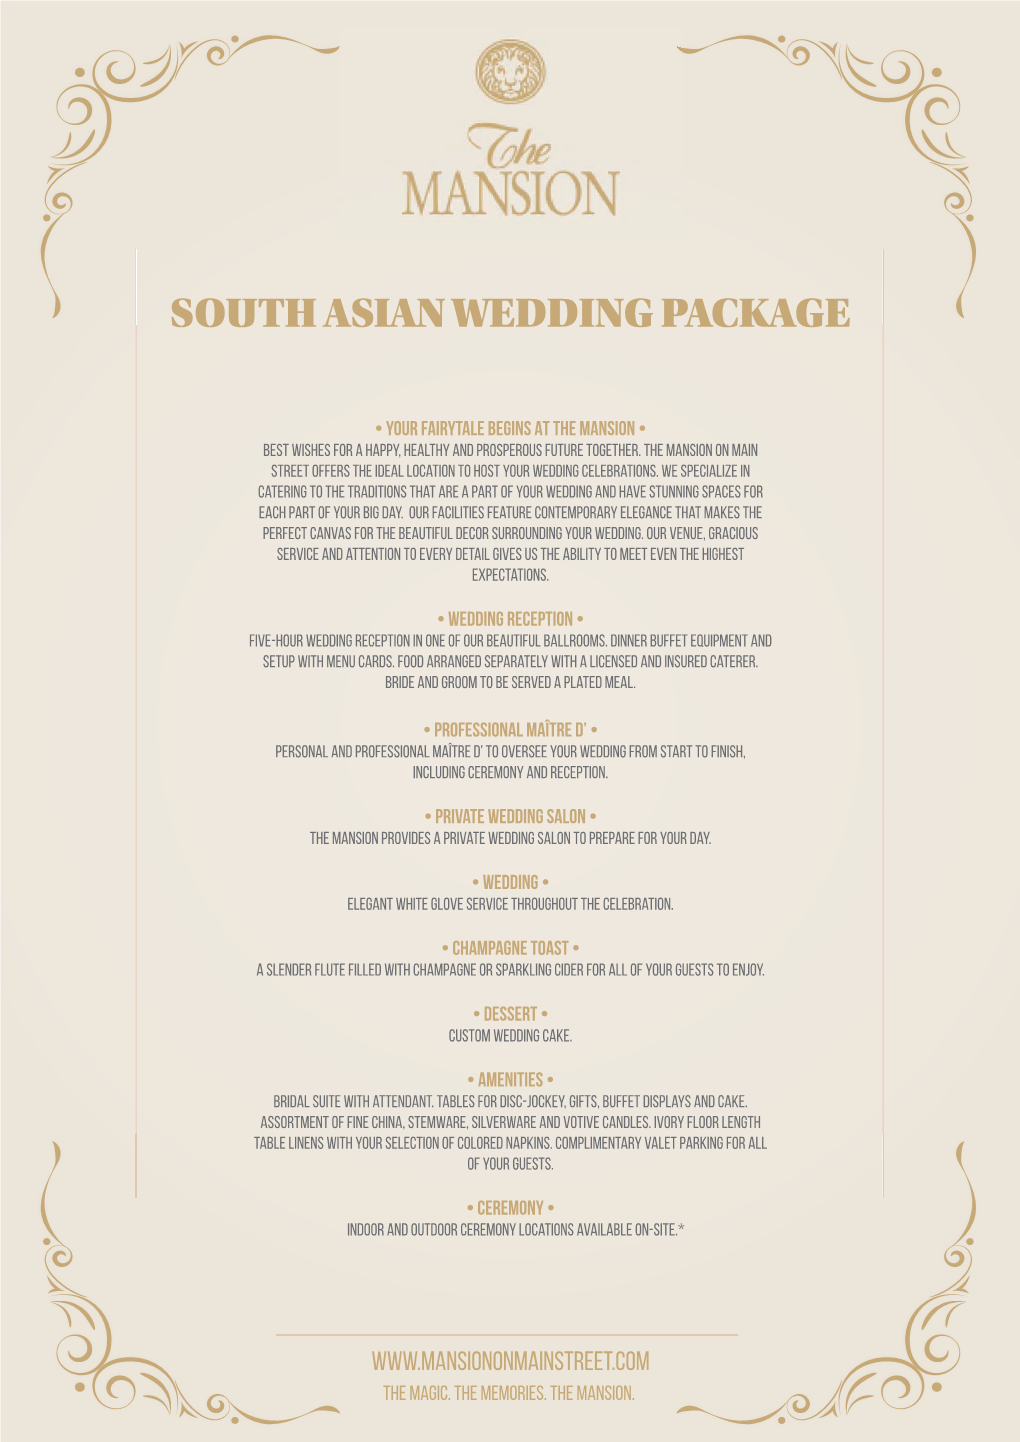 South Asian Wedding Package